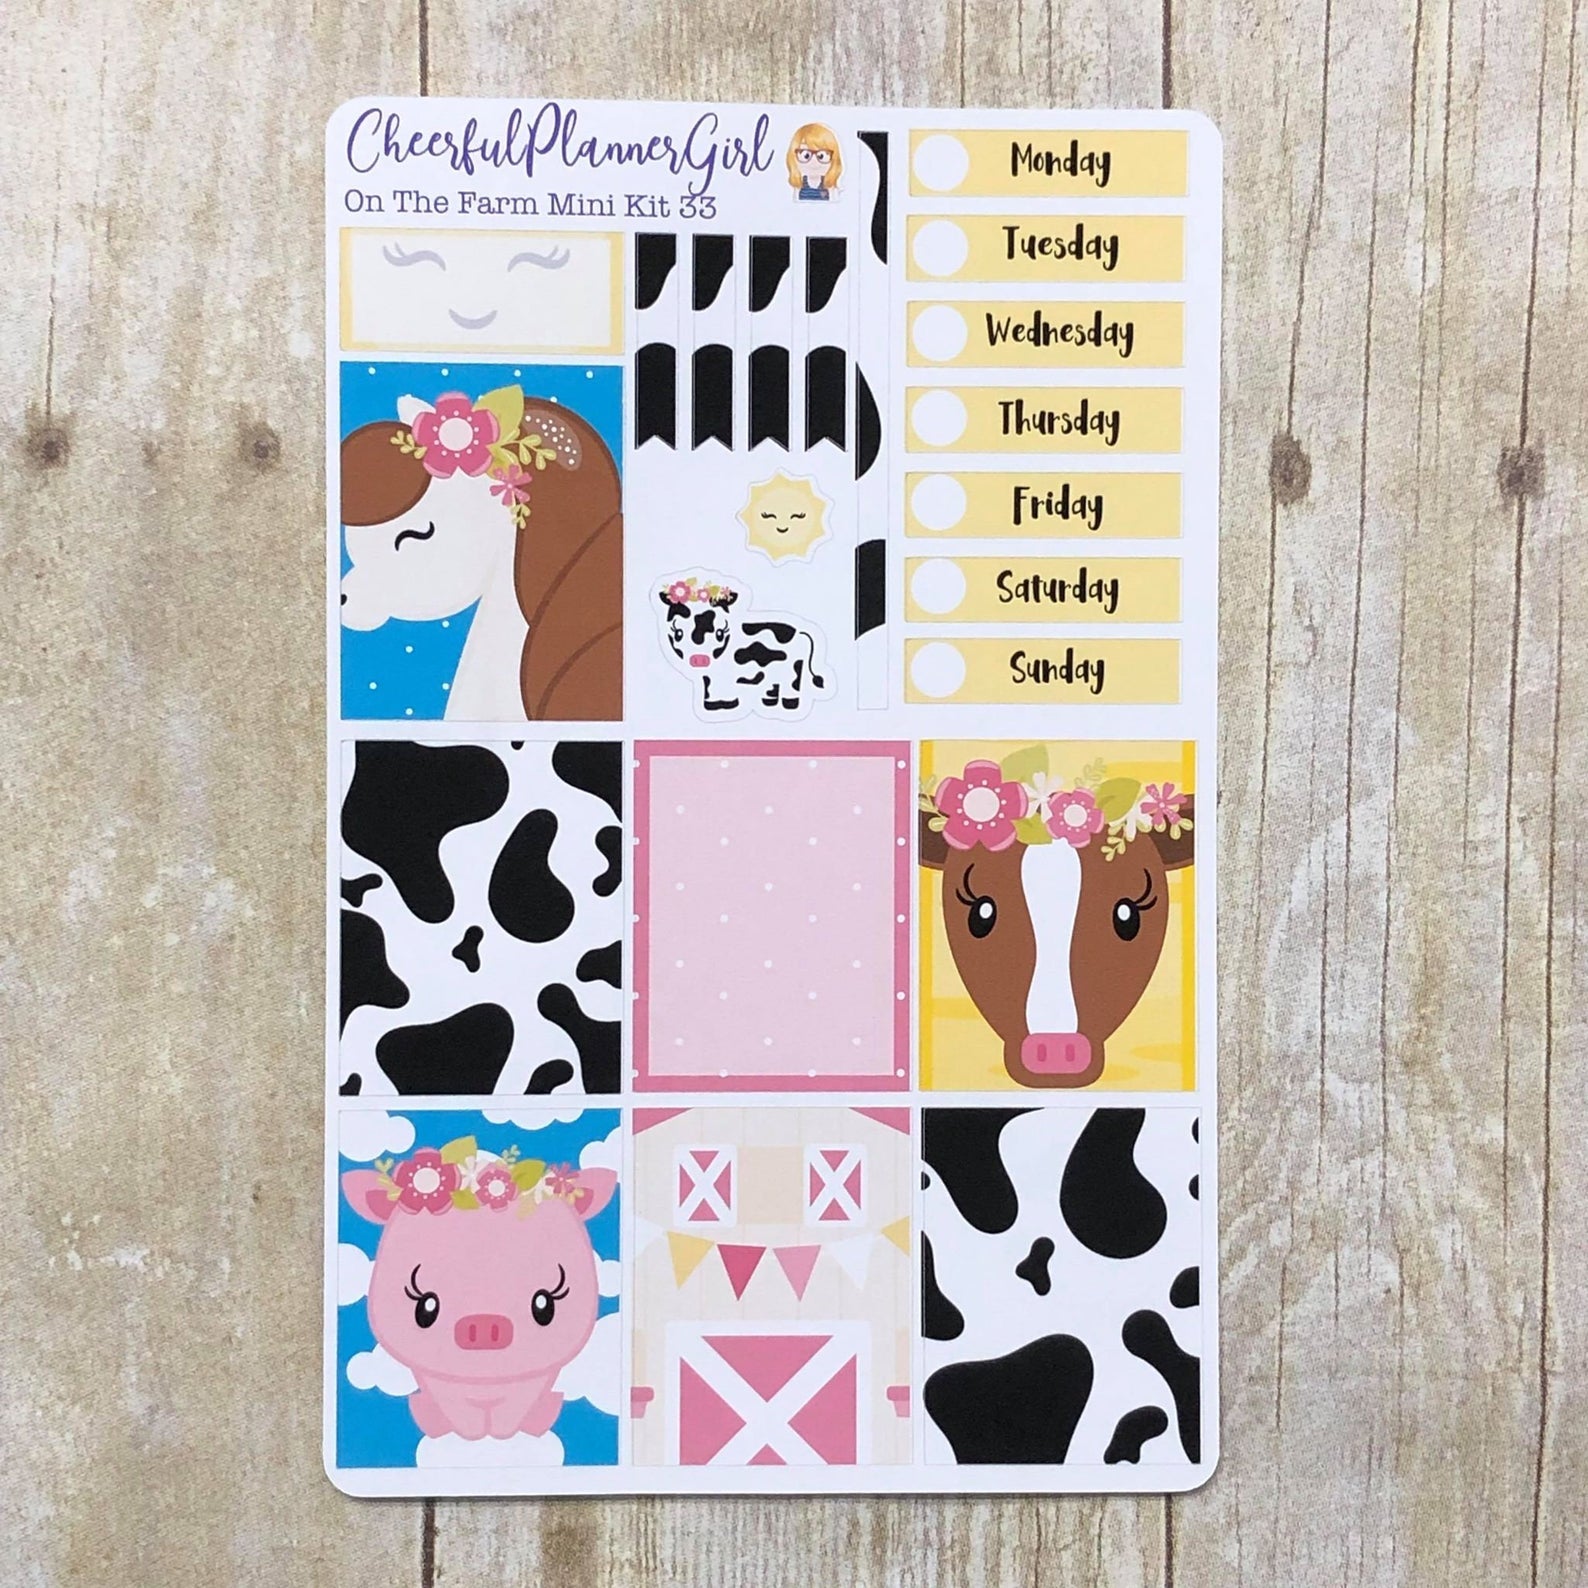 On The Farm Mini Kit Weekly Layout Planner Stickers